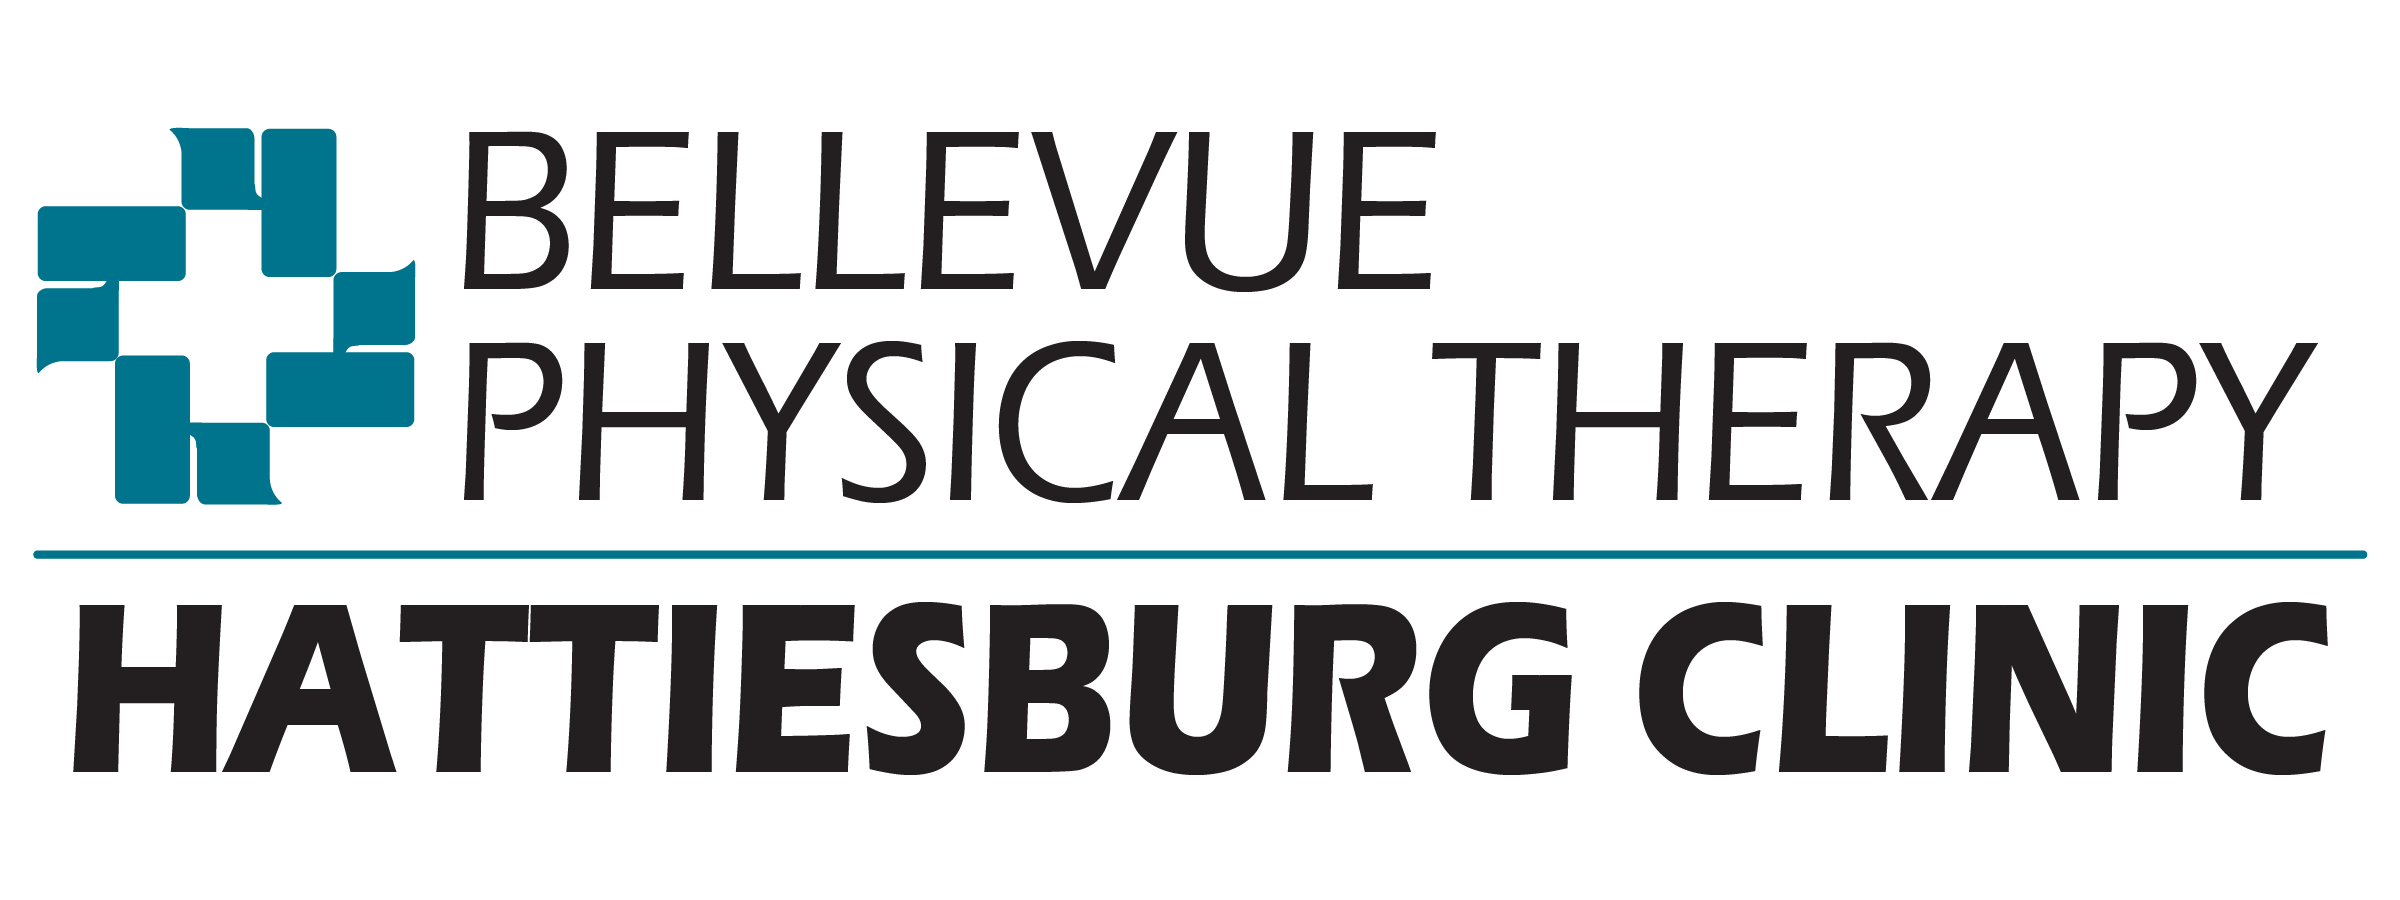 Bellevue Physical Therapy logo